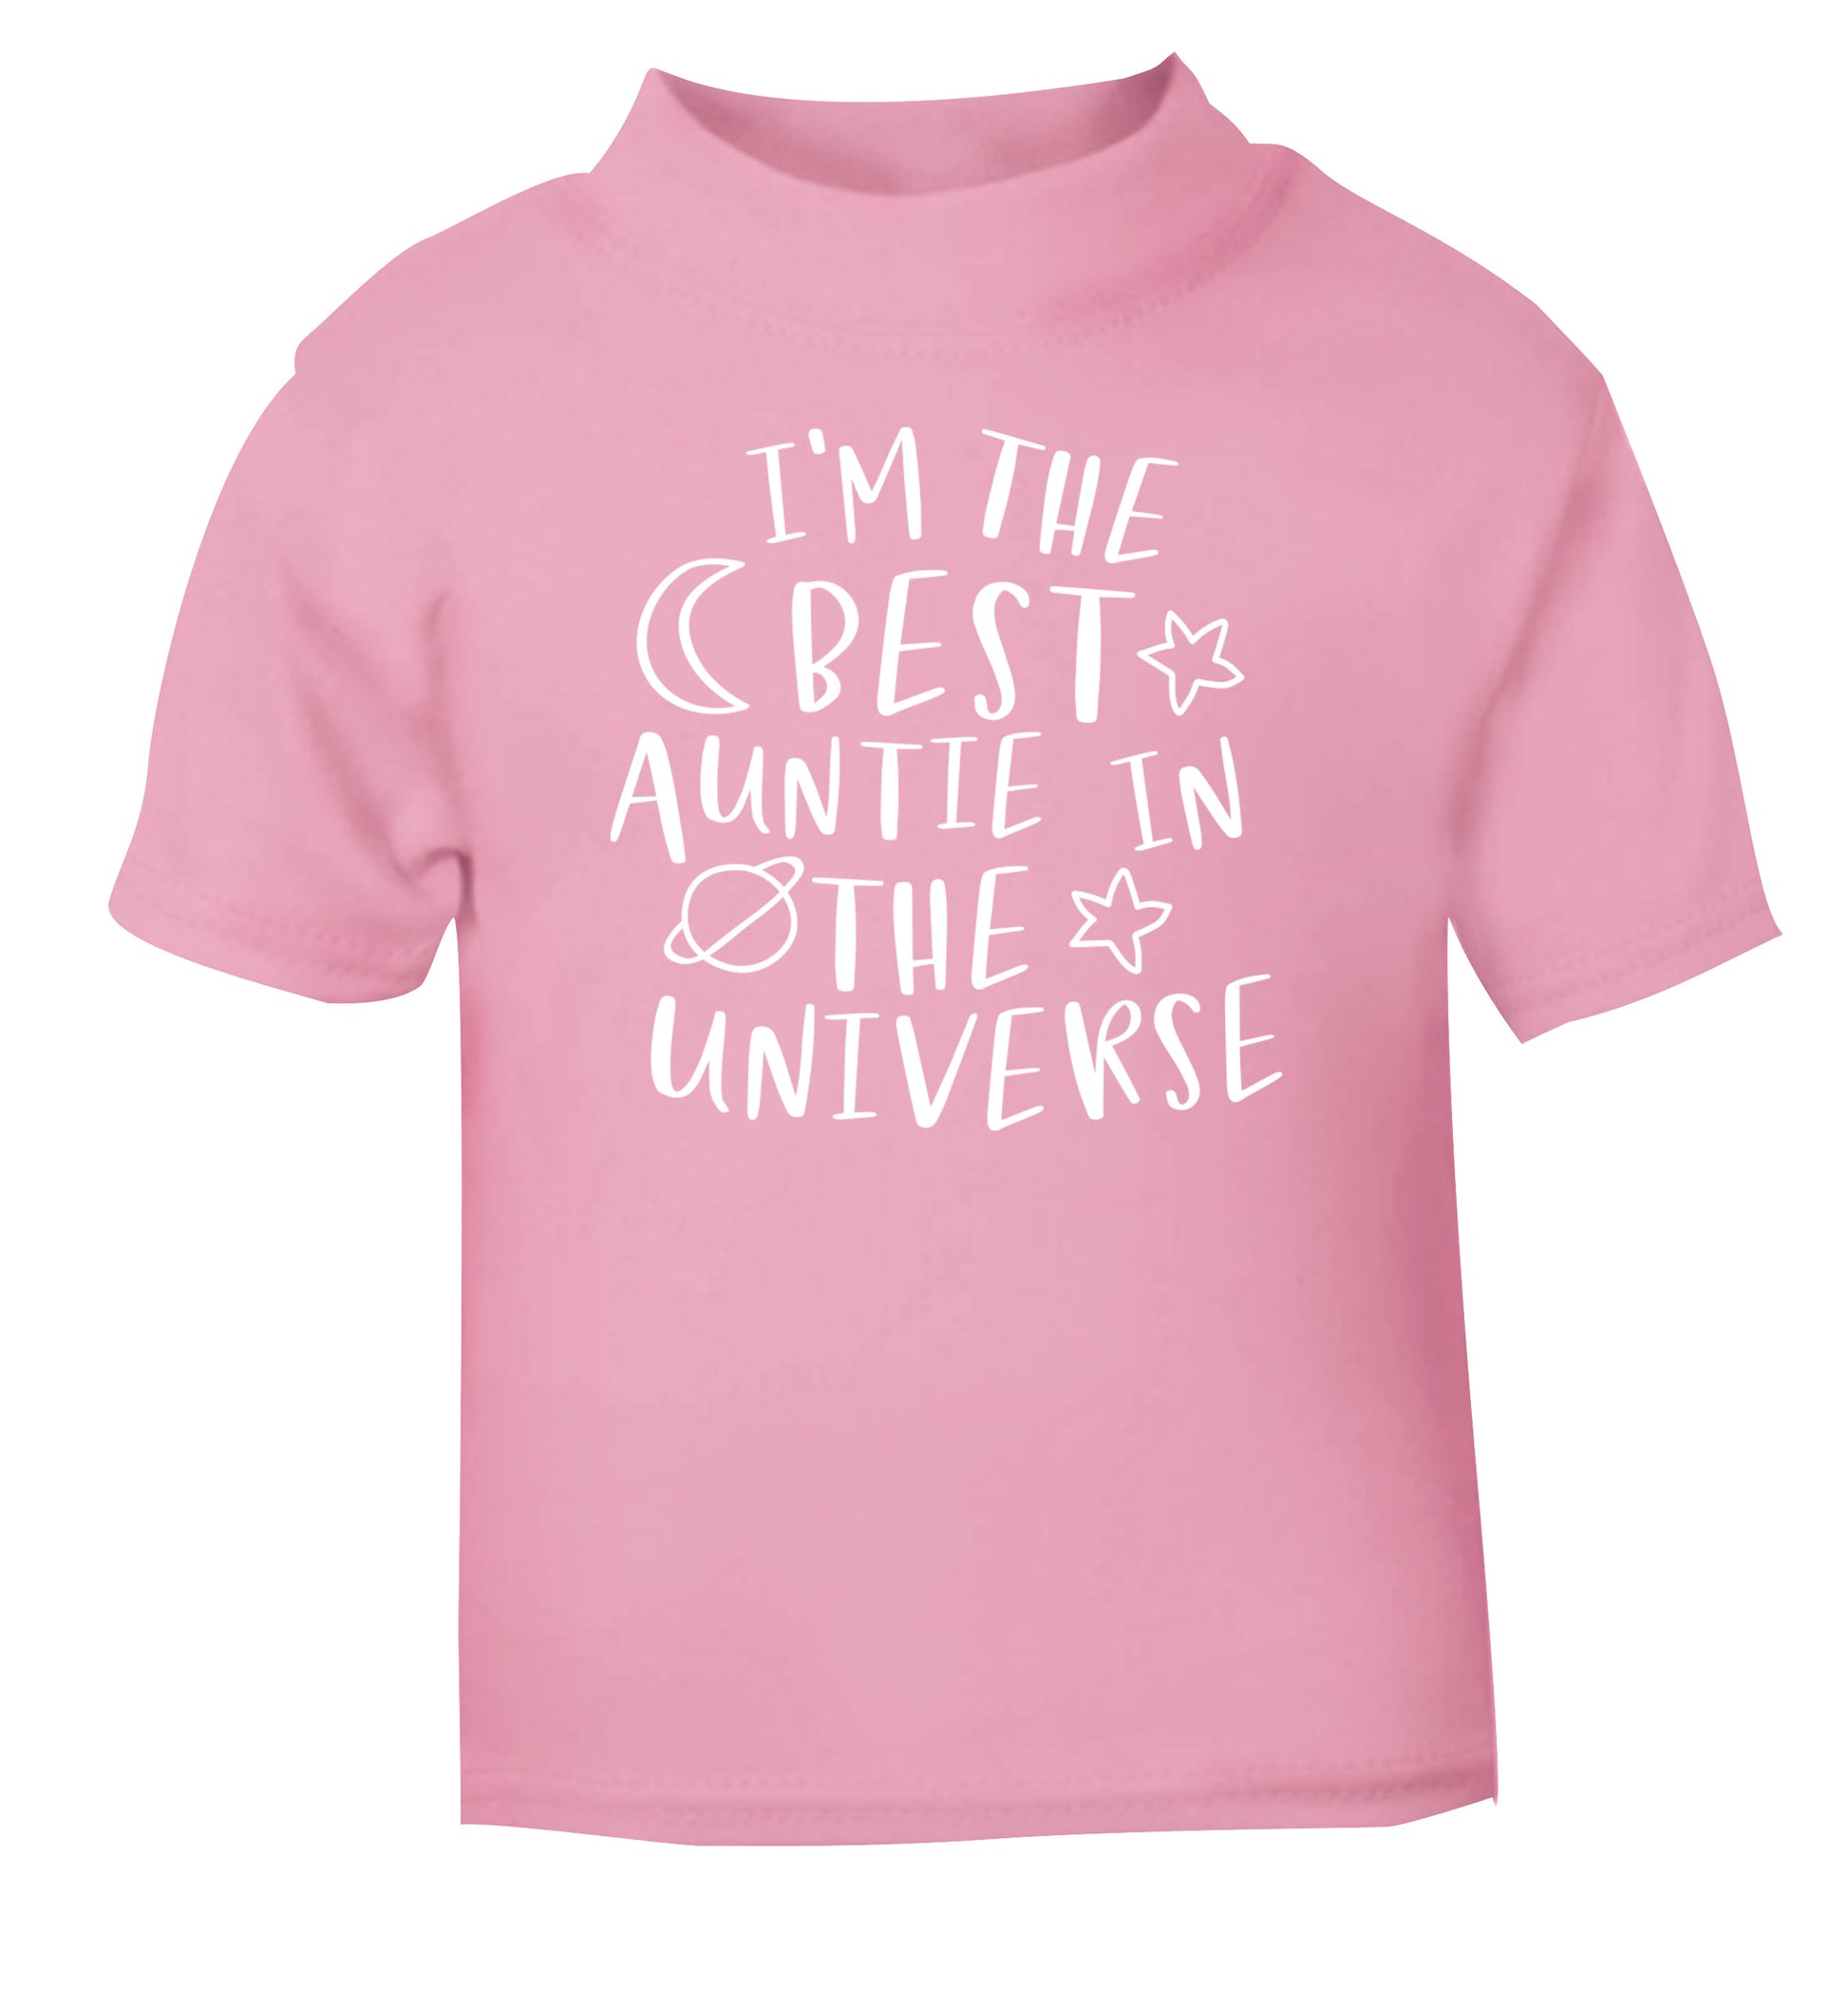 I'm the best auntie in the universe light pink Baby Toddler Tshirt 2 Years